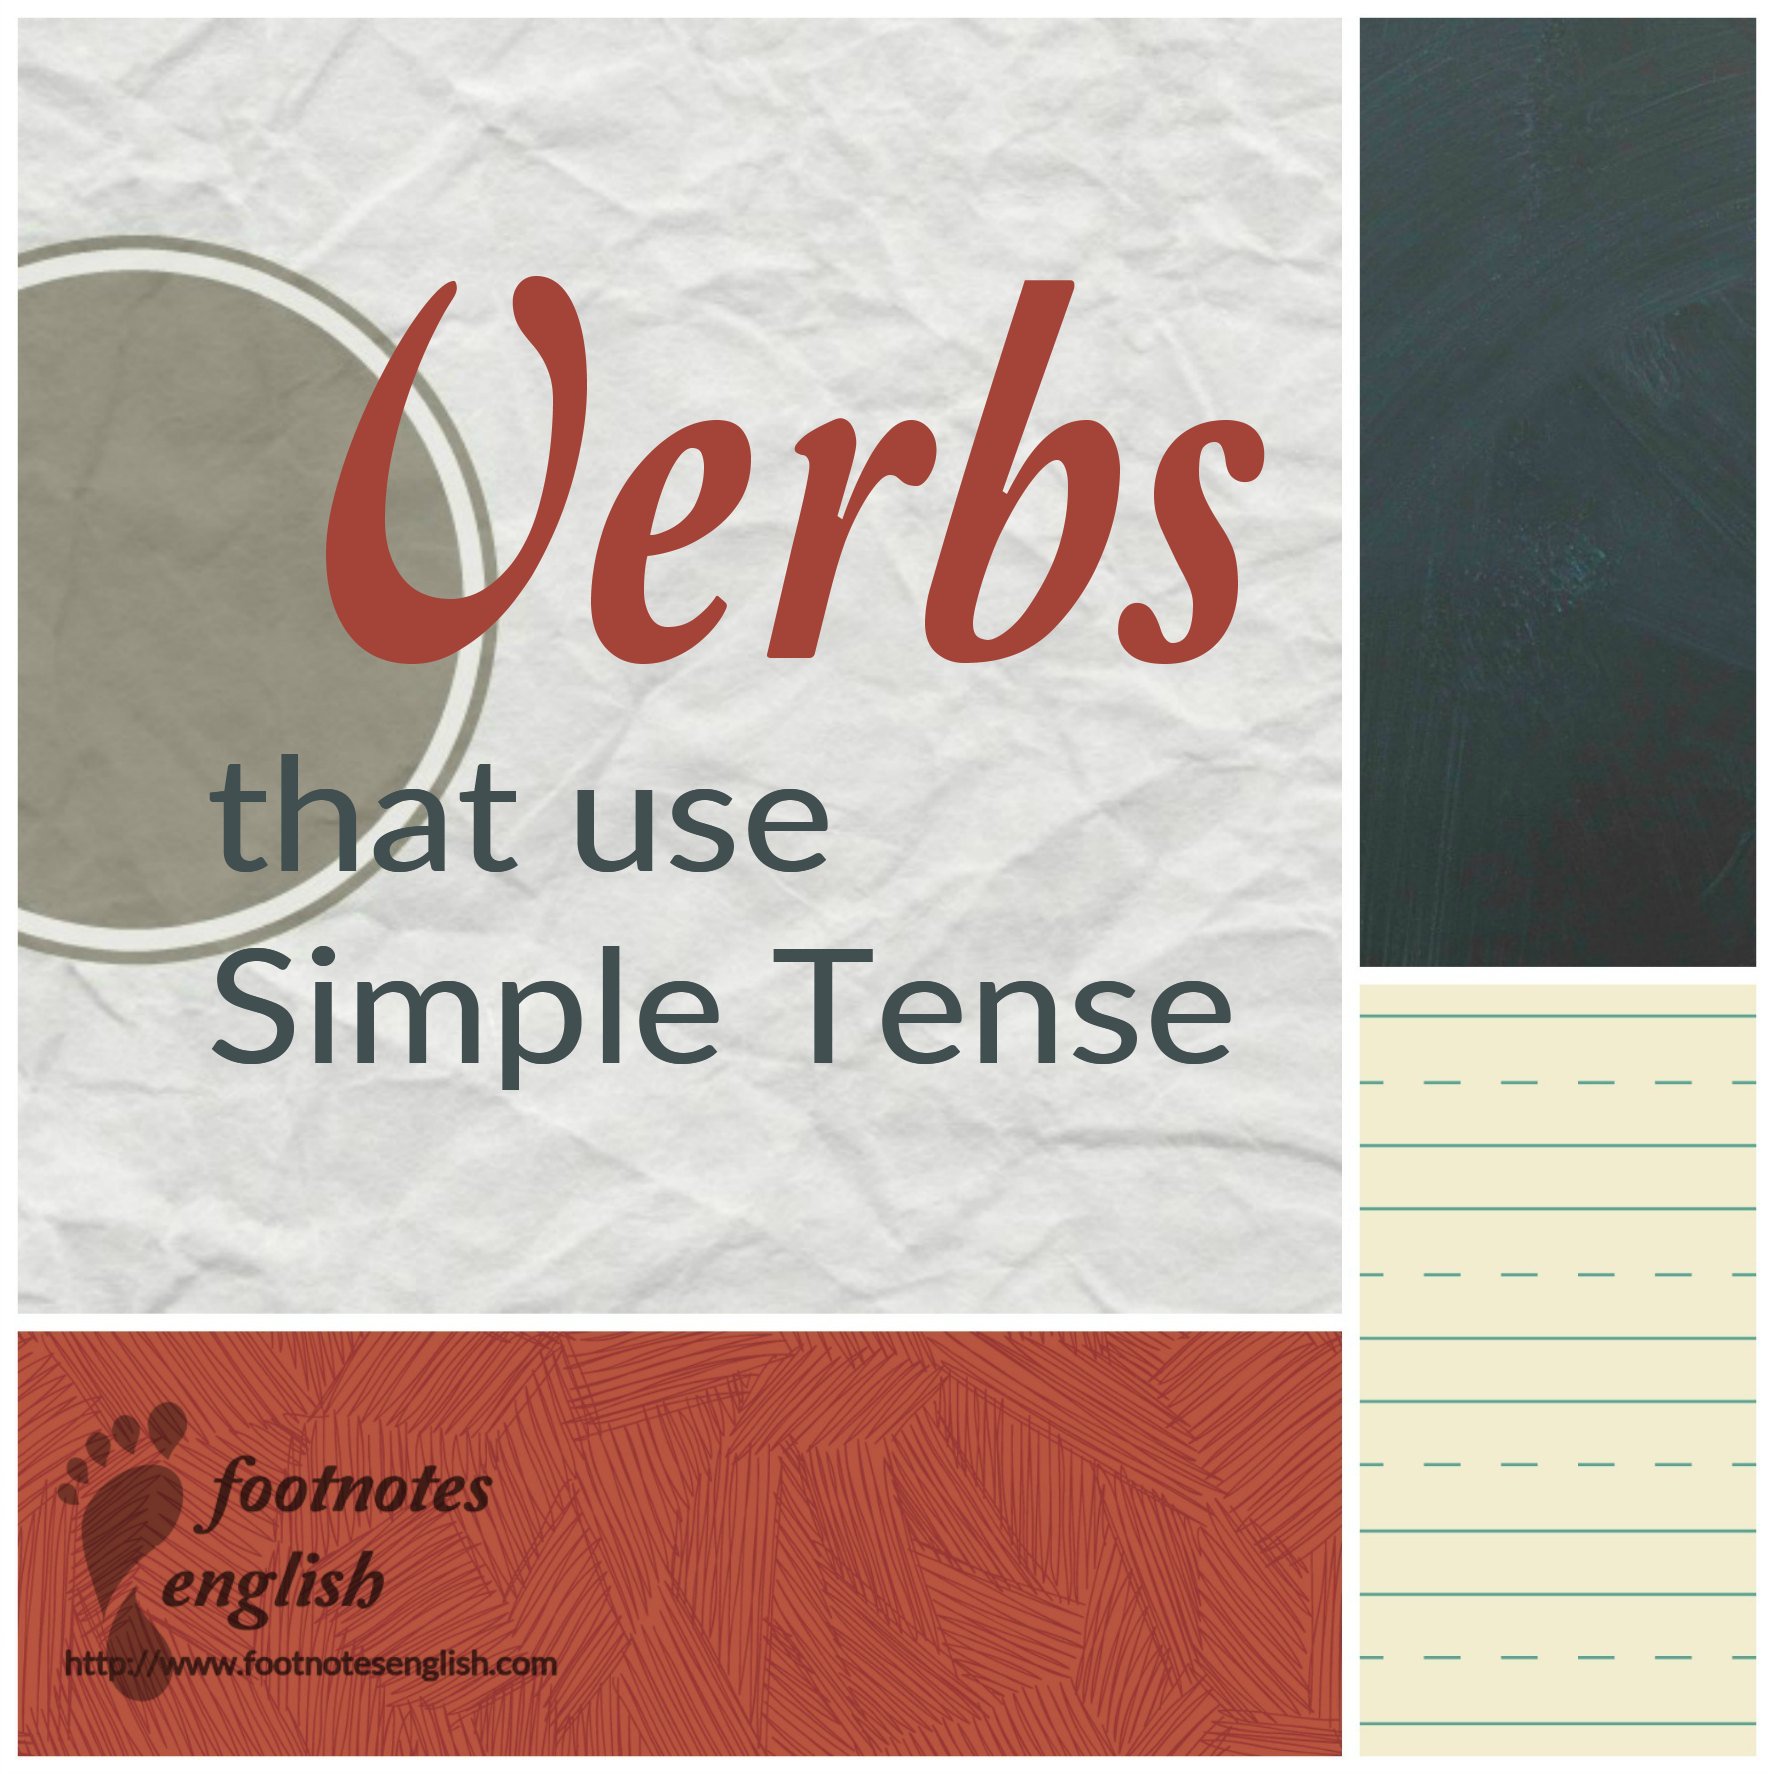 verbs-that-use-simple-tense-footnotes-english